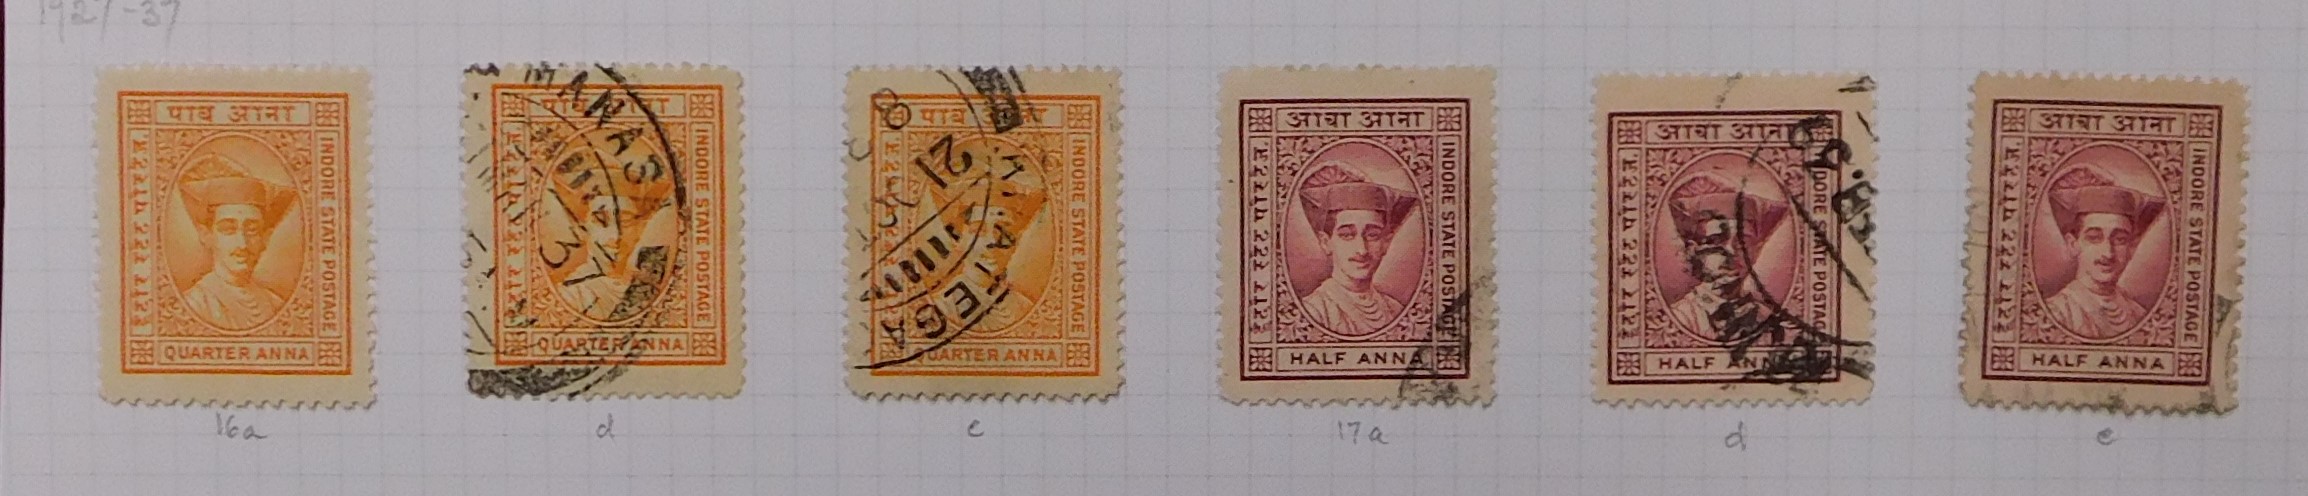 India (Indore) 1904-20 fine used, Incl SG 11b (Cat £225) and 1927 to 4 Anna (23) - Image 4 of 5